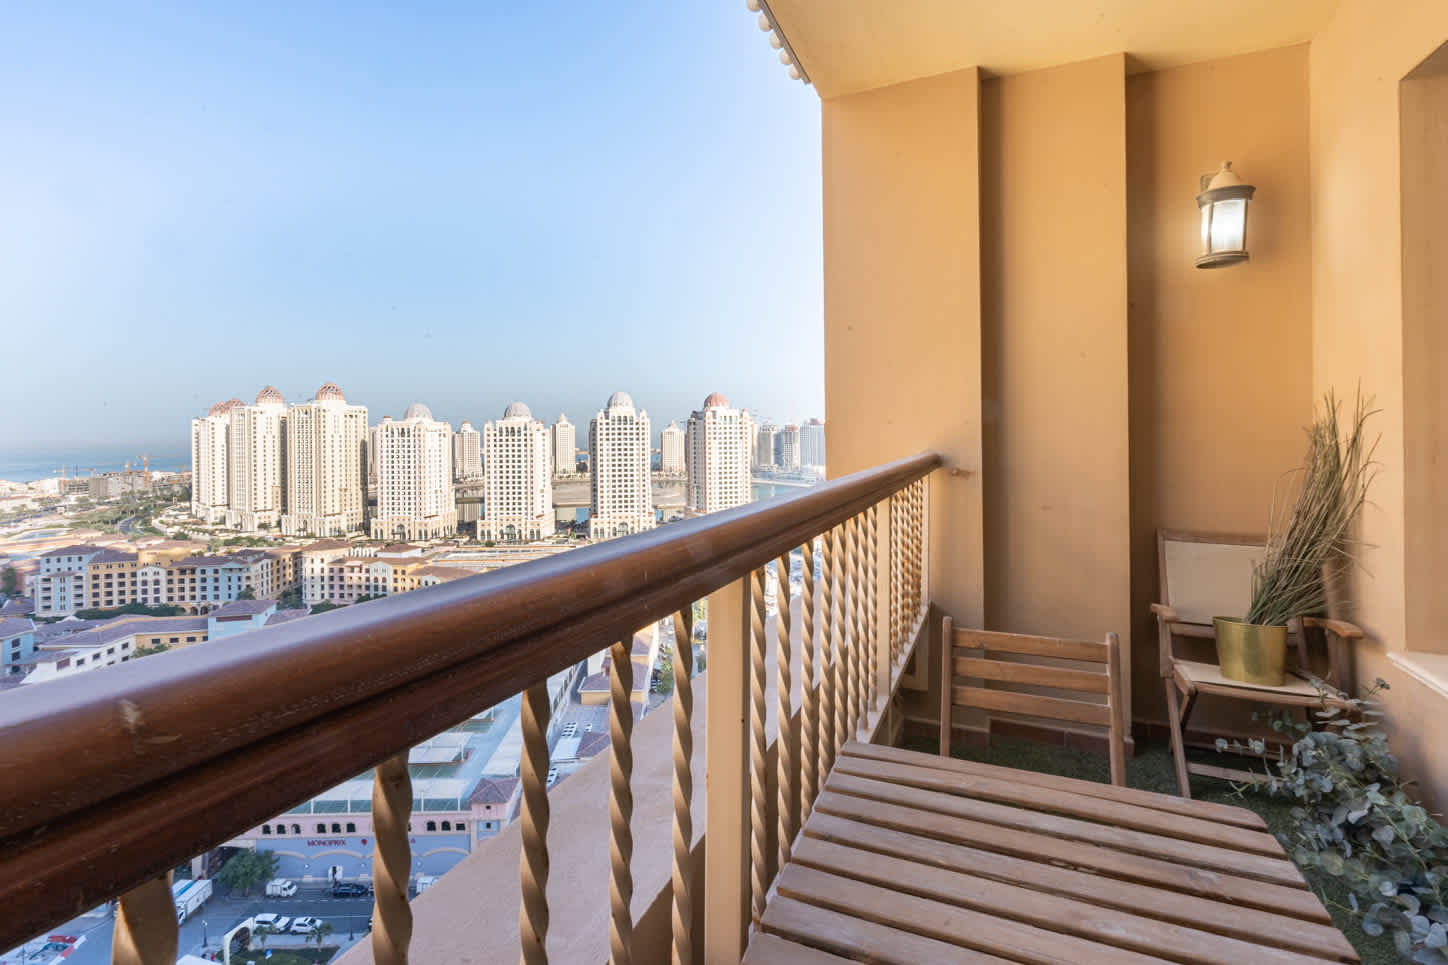 25 Spaces Real Estate - Porto Arabia - Apartment for Rent - 17th of MAY ( REF 00300 )10